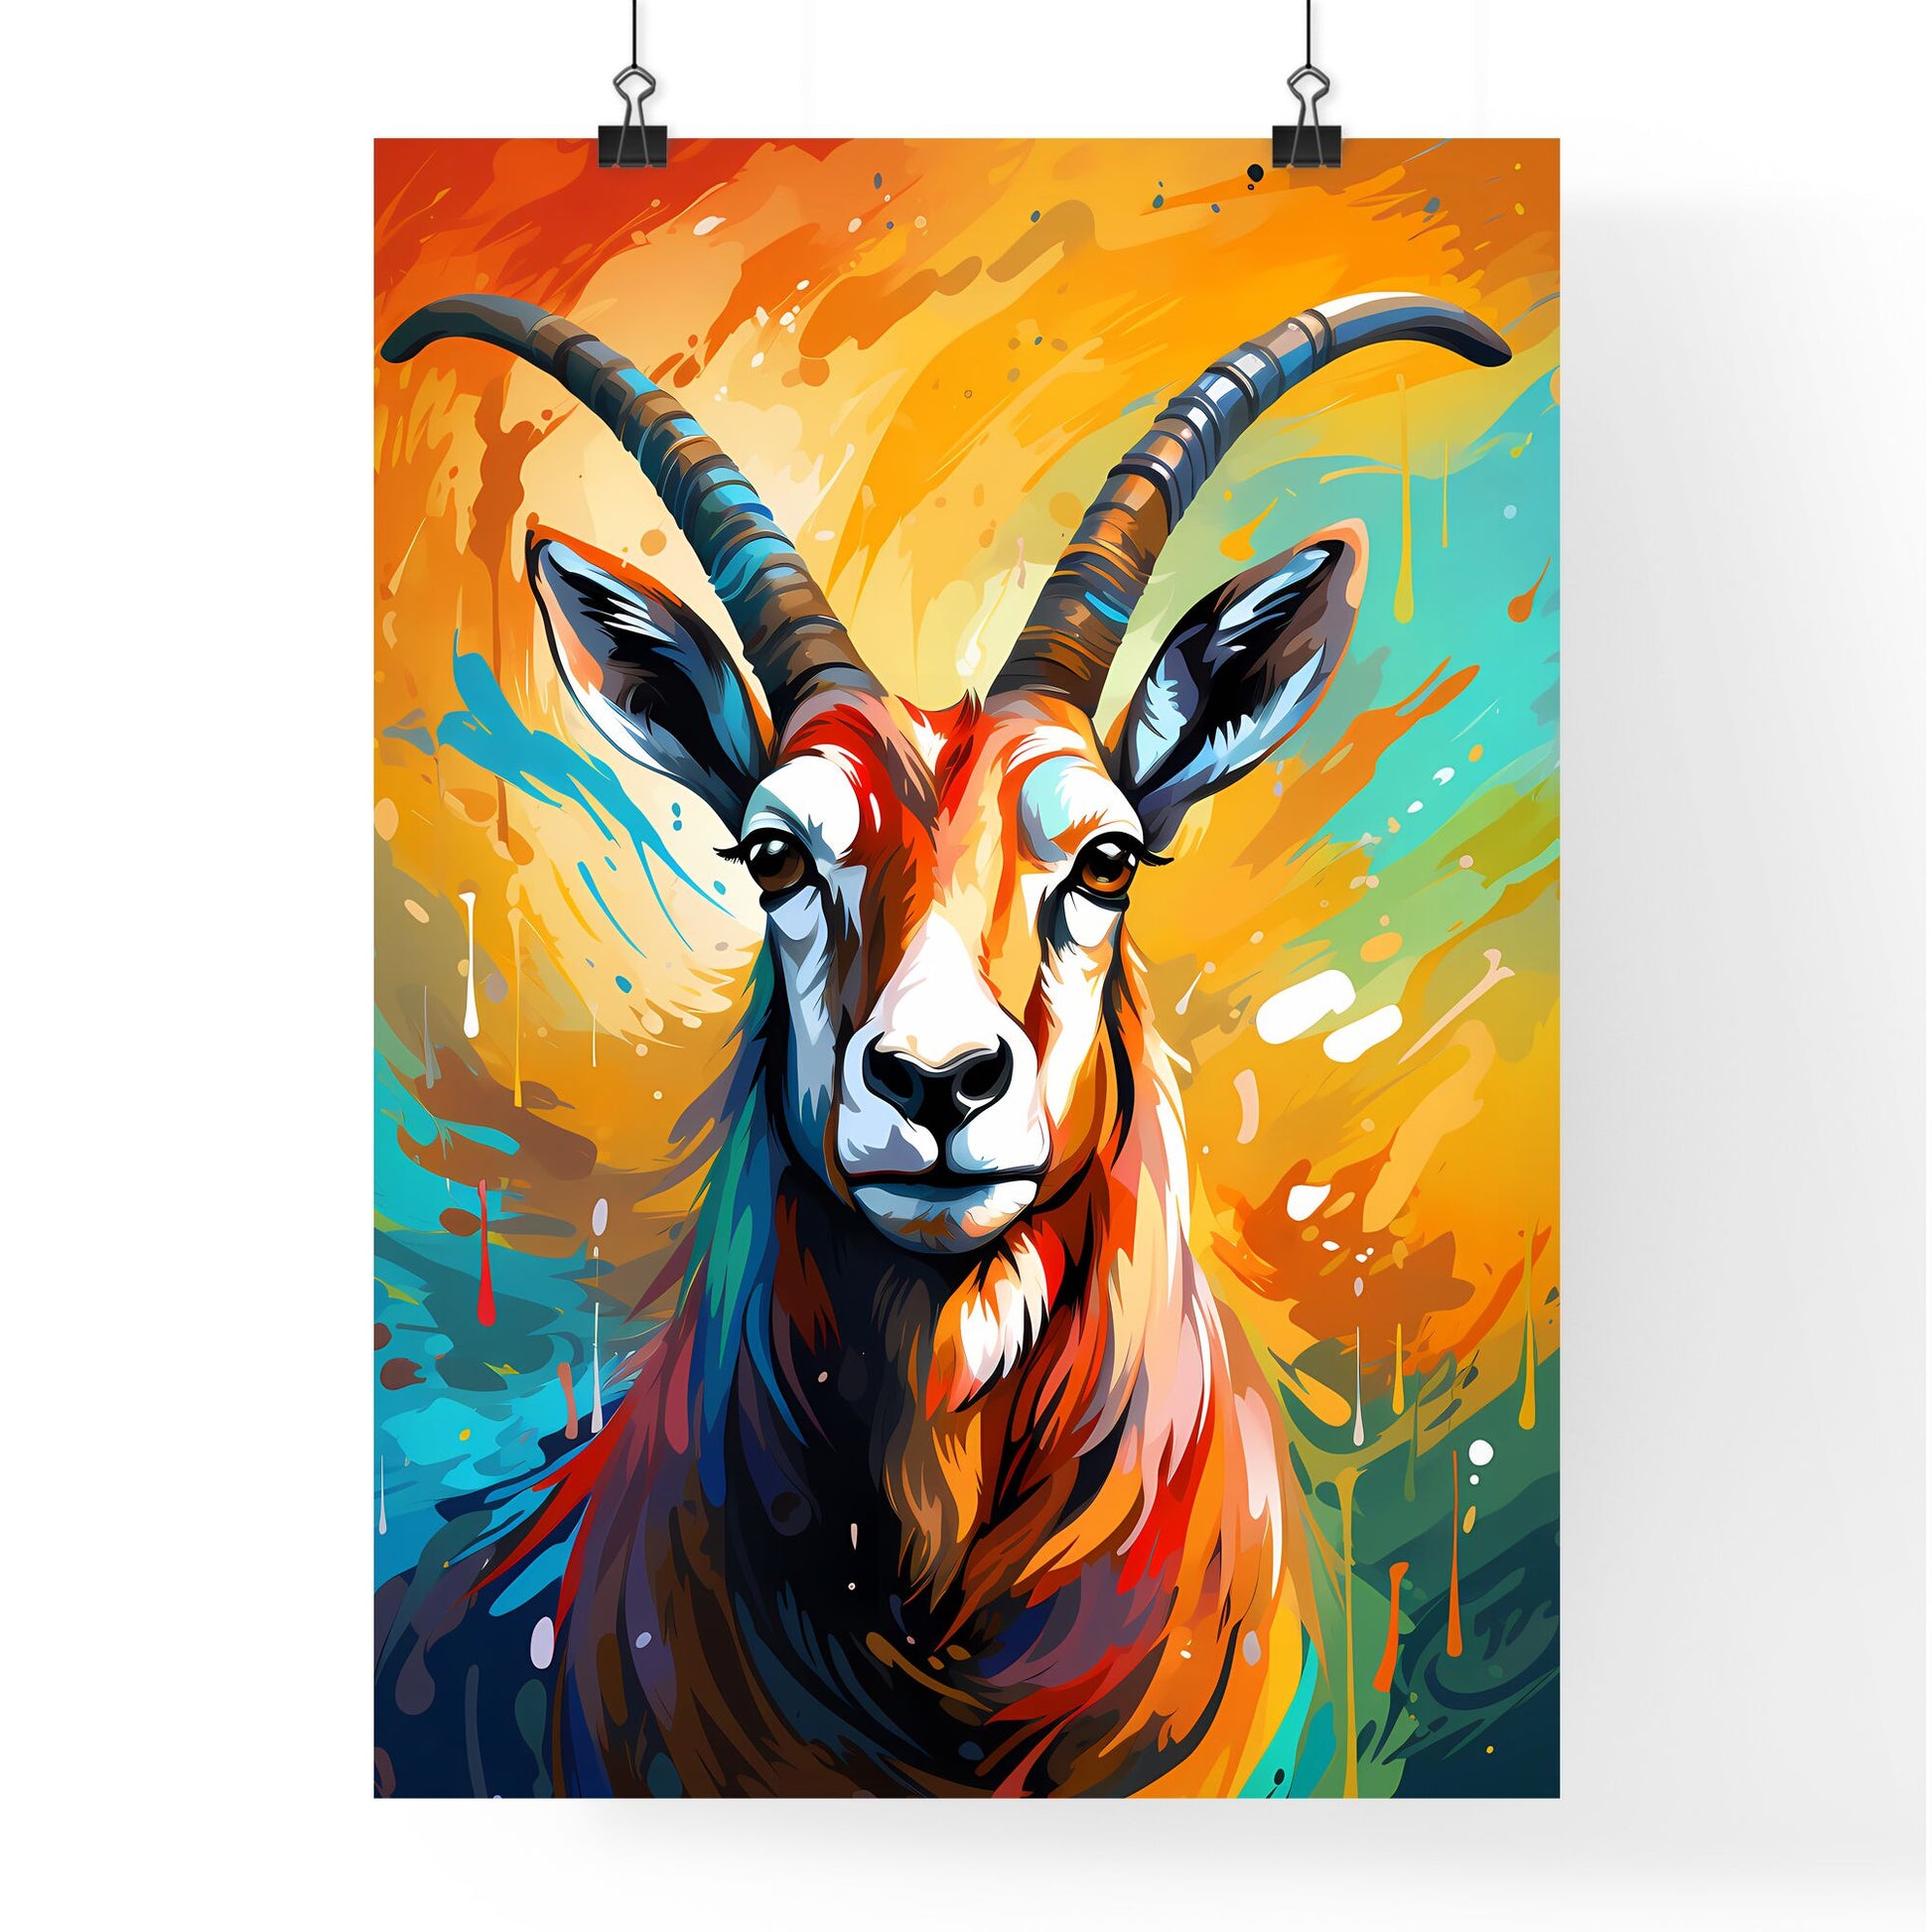 Endangered Bontebok Antelope - A Painting Of A Goat With Horns Default Title